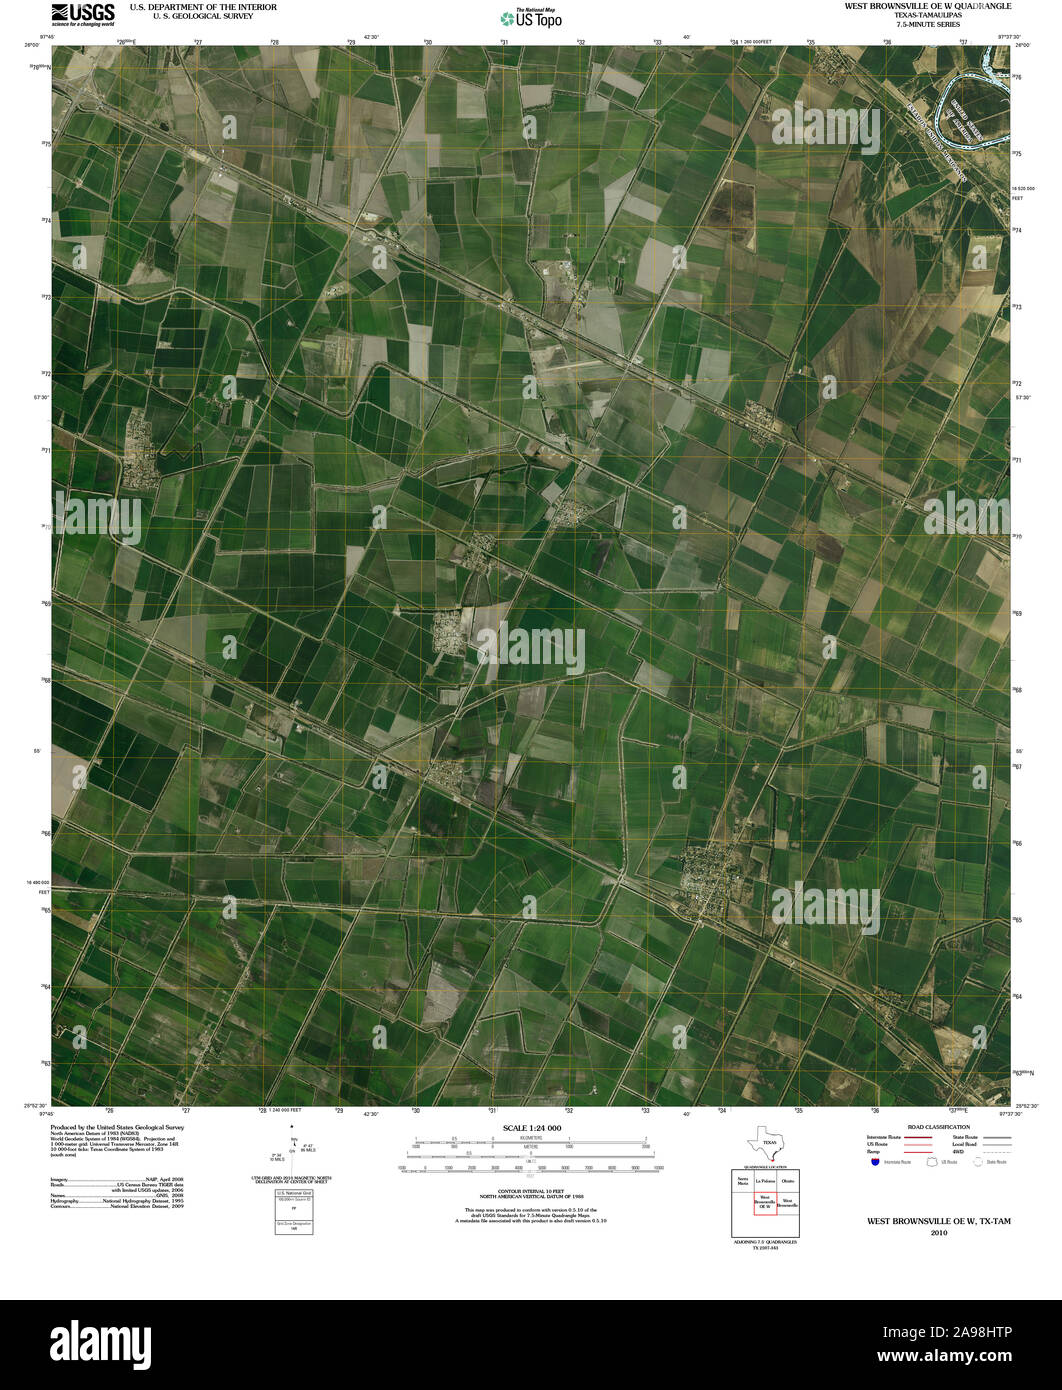 USGS TOPO Map Texas TX West Brownsville OE W 20100702 TM Stock Photo